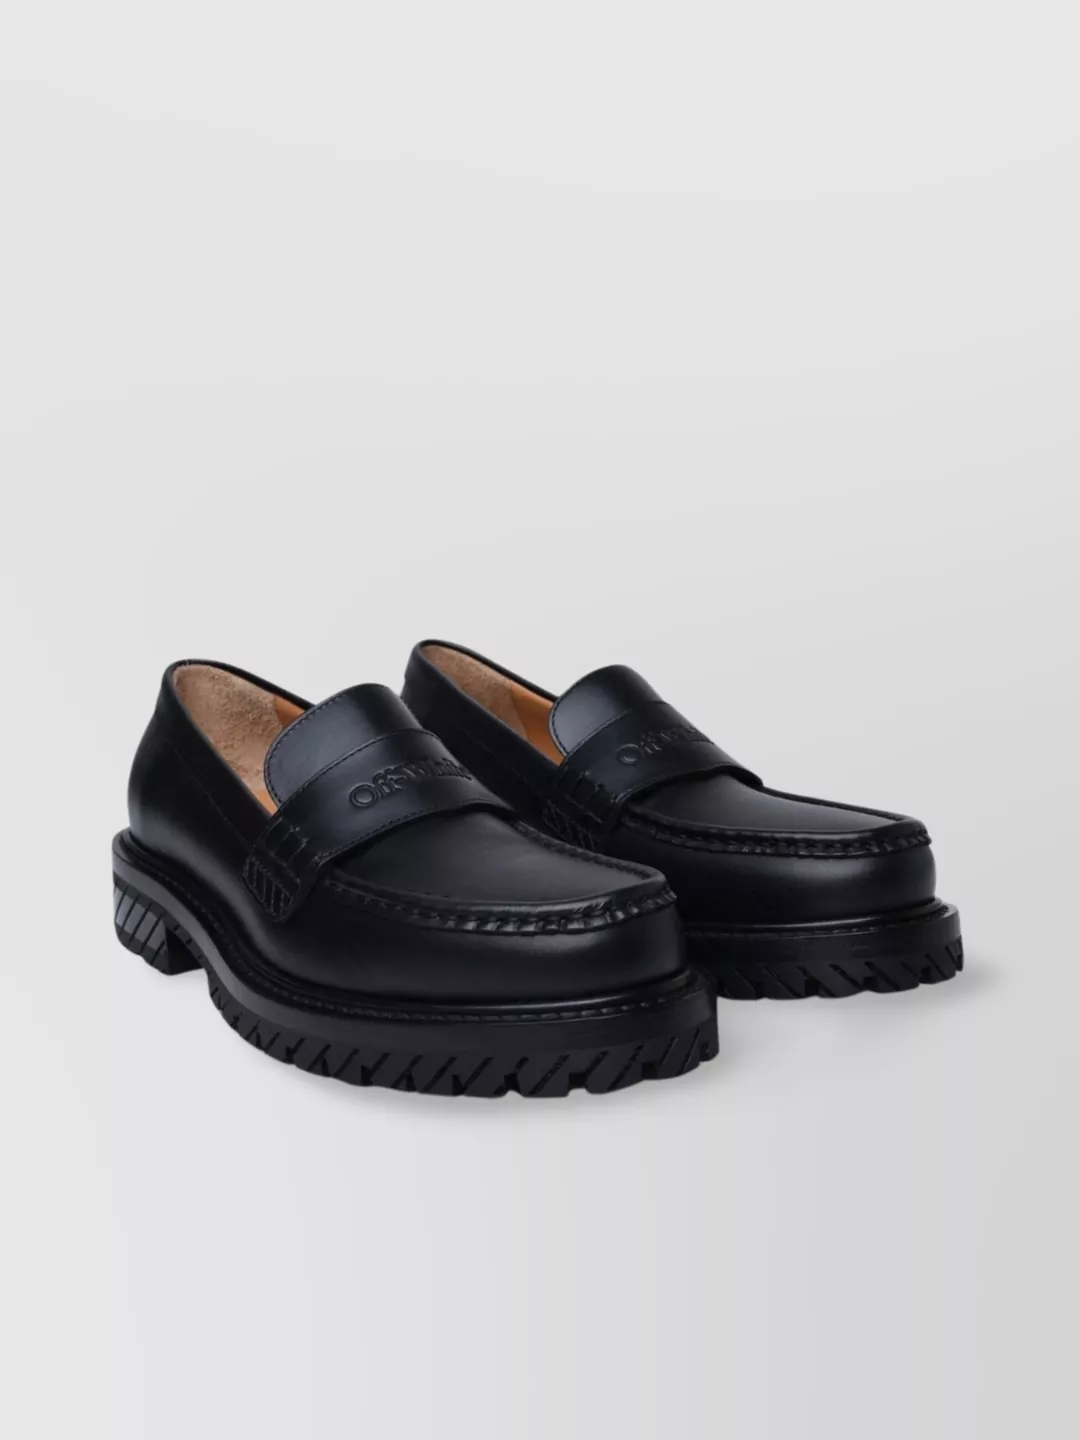 Off-white Chunky Sole Loafers With Penny Keeper Strap